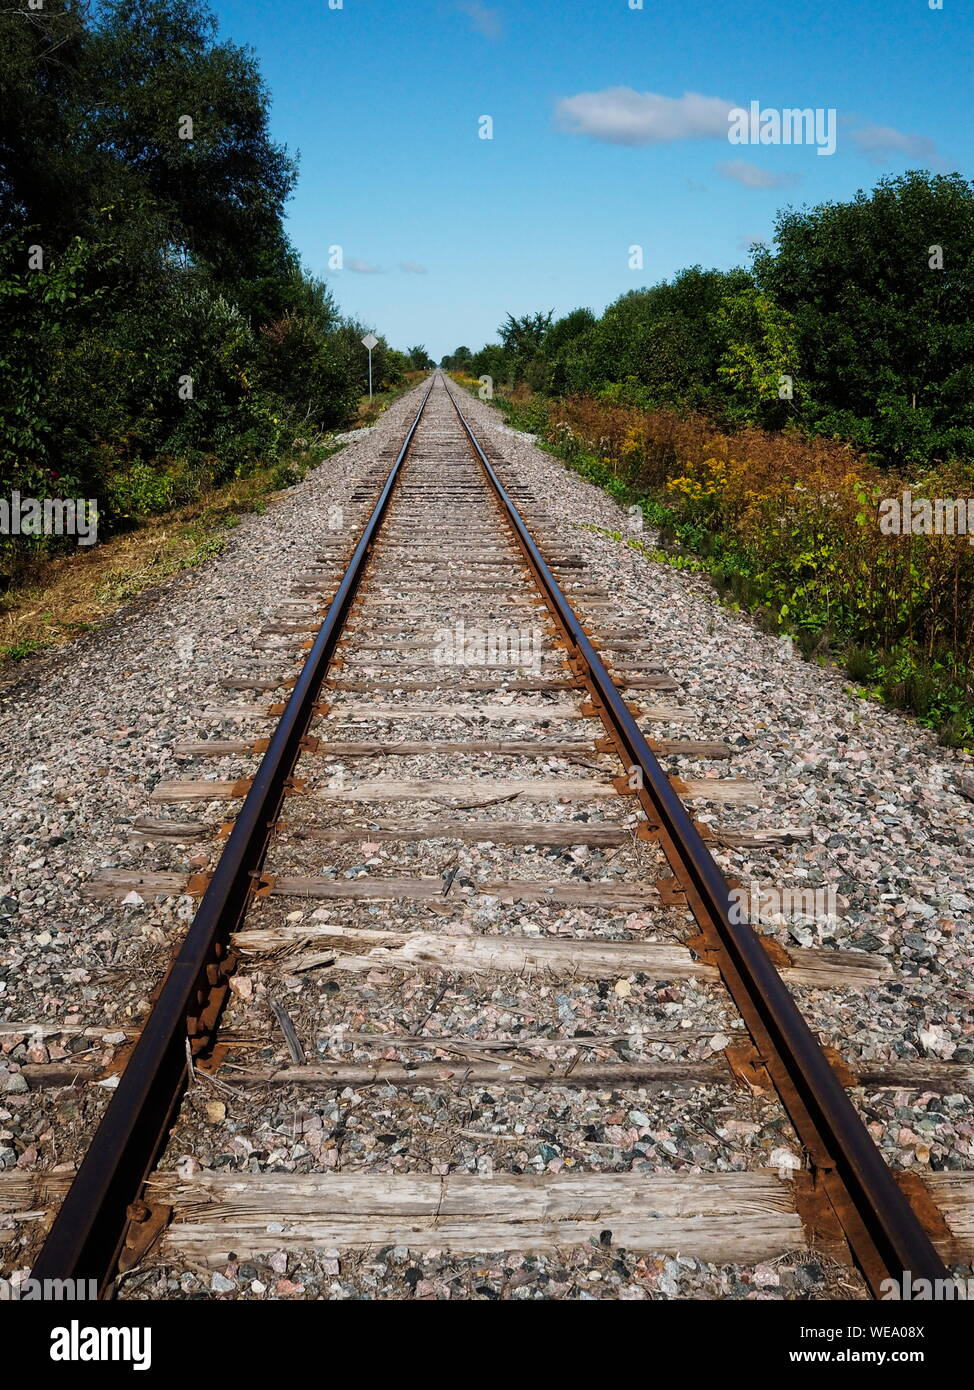 Railway tracks in a rural scene with a bright blue sky and white clouds Stock Photo